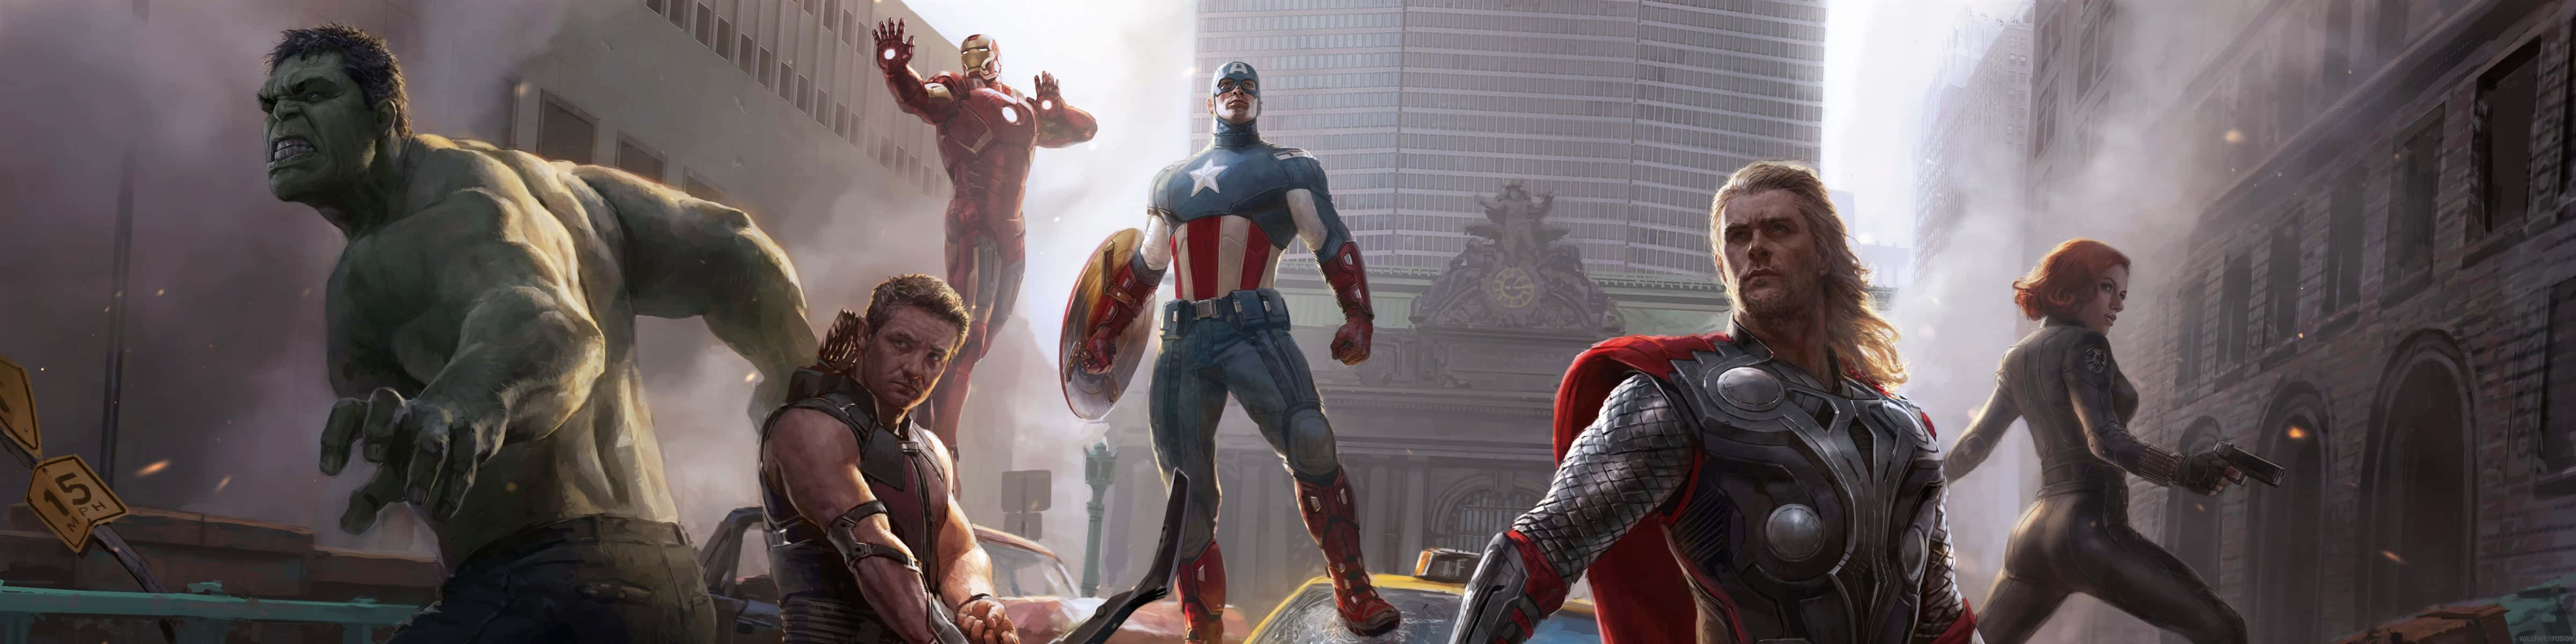 Assemble the Justice with Avengers Dual Screen Wallpaper